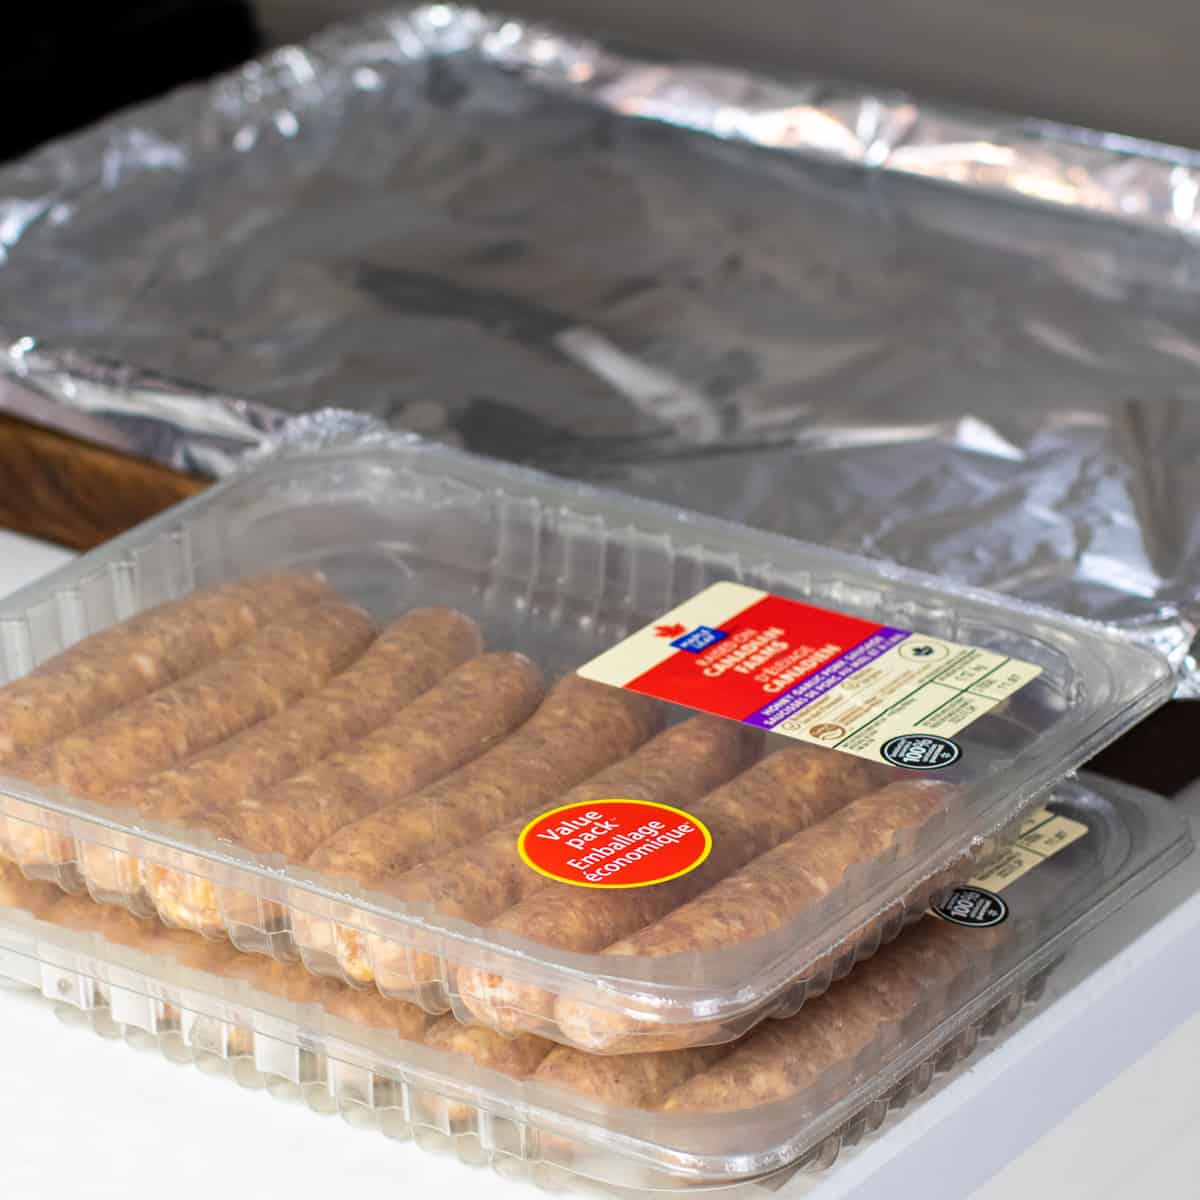 Packages of Italian sausages next to a baking sheet.